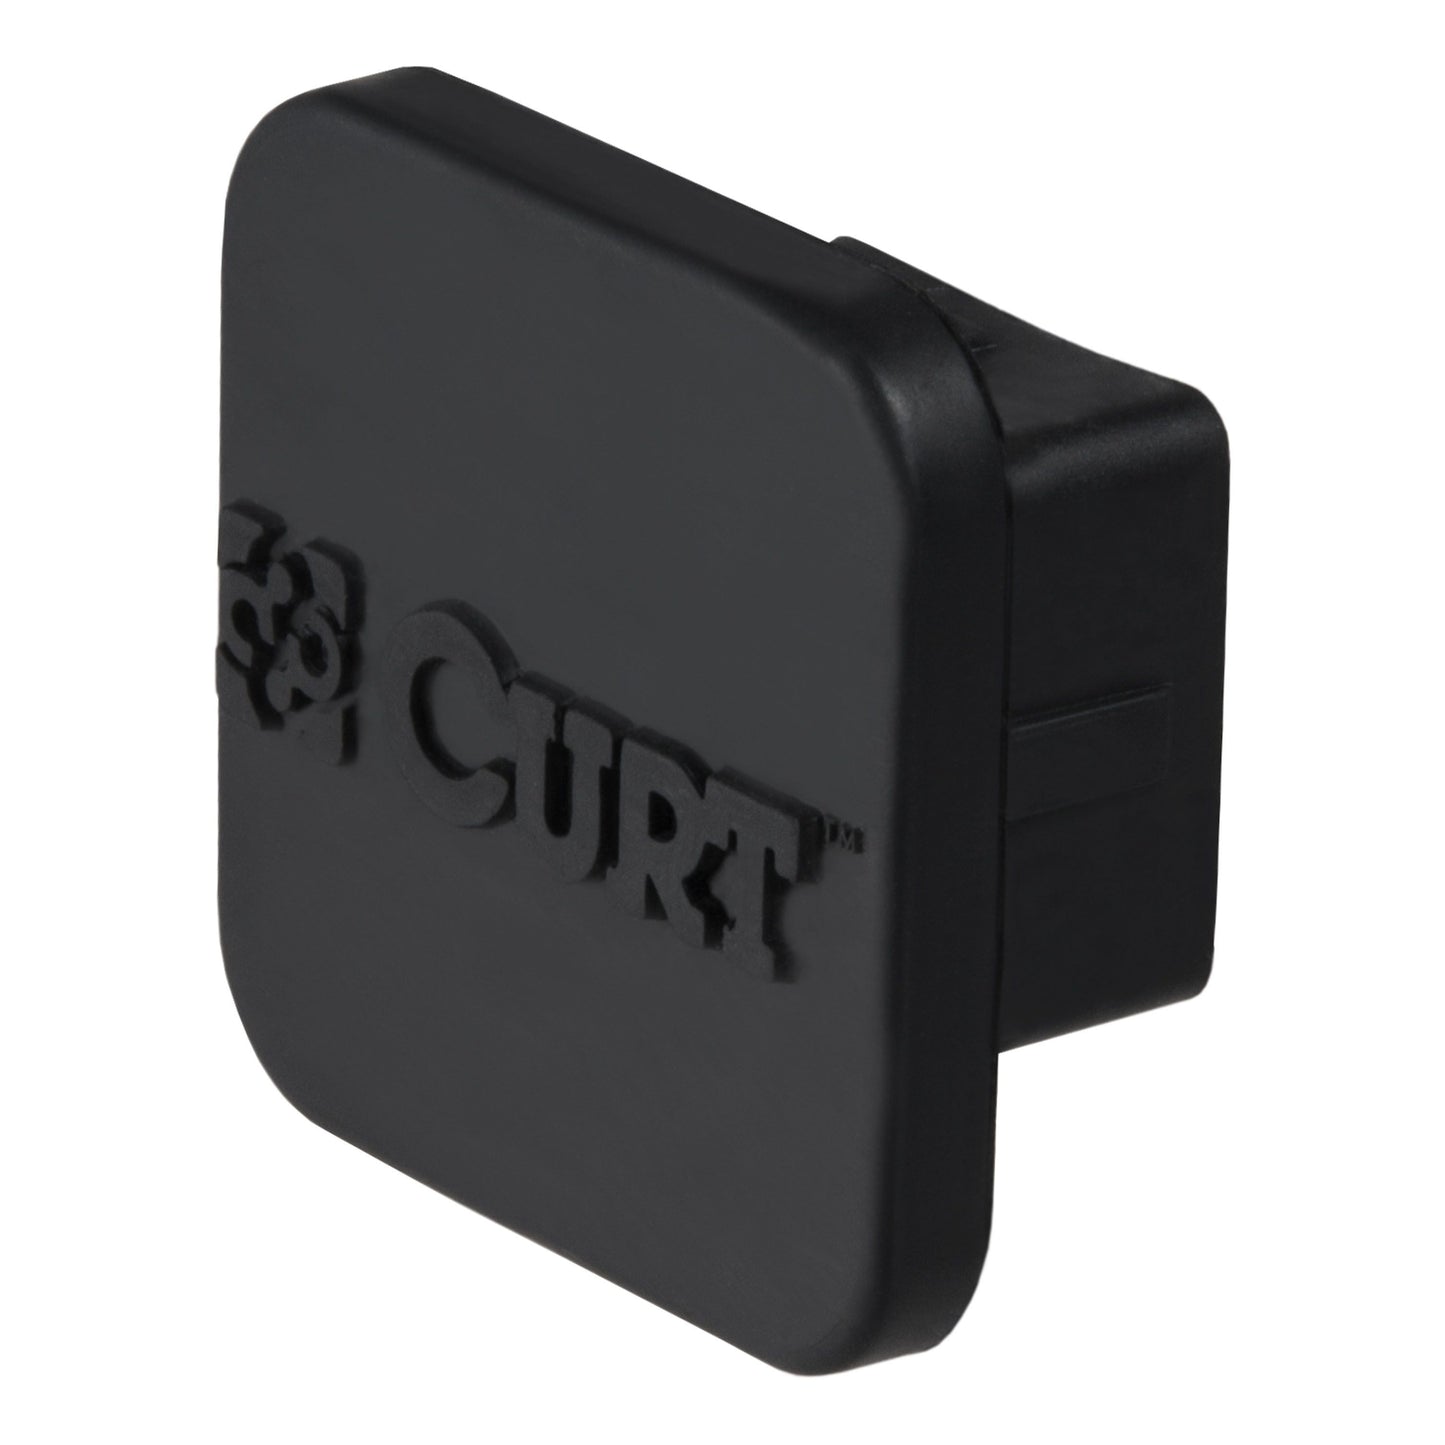 CURT 22271 Rubber Hitch Tube Cover 1 1/4" x 1 1/4"